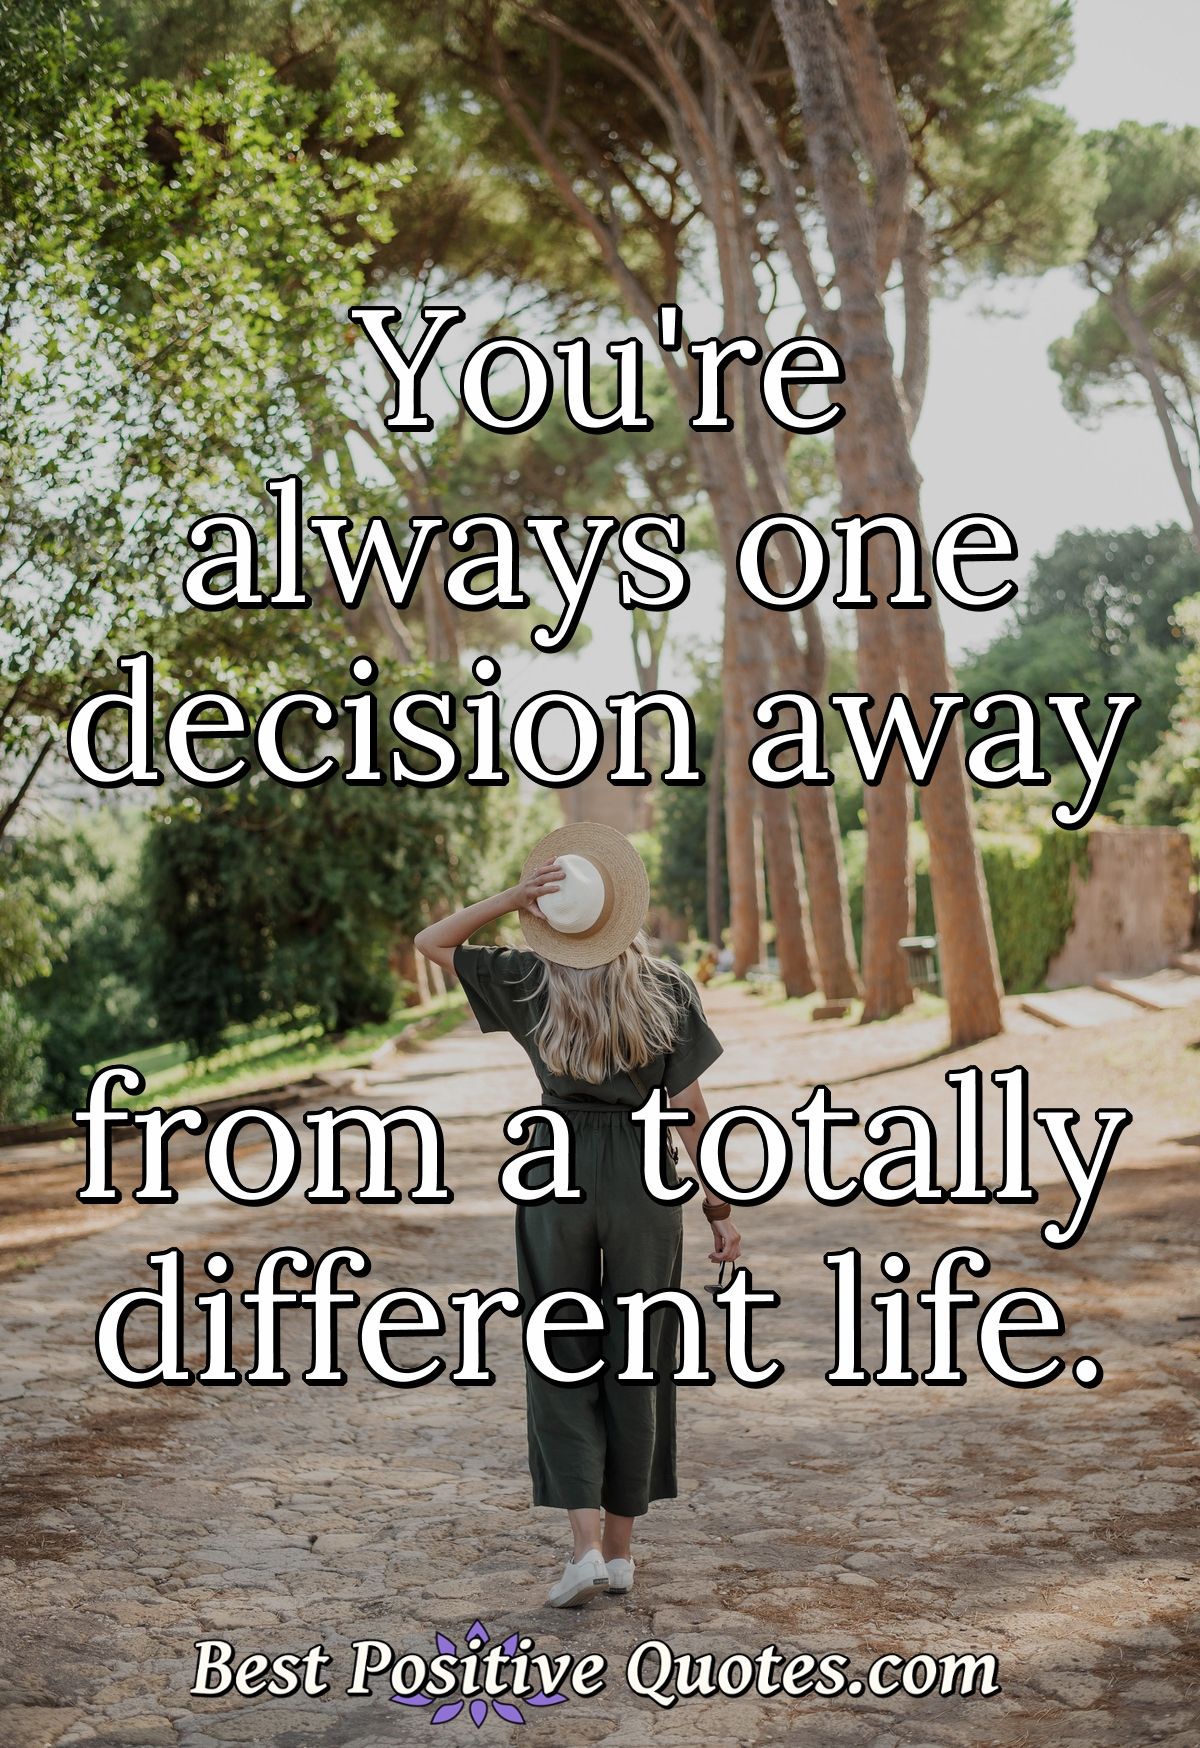 You're always one decision away from a totally different life. - Anonymous